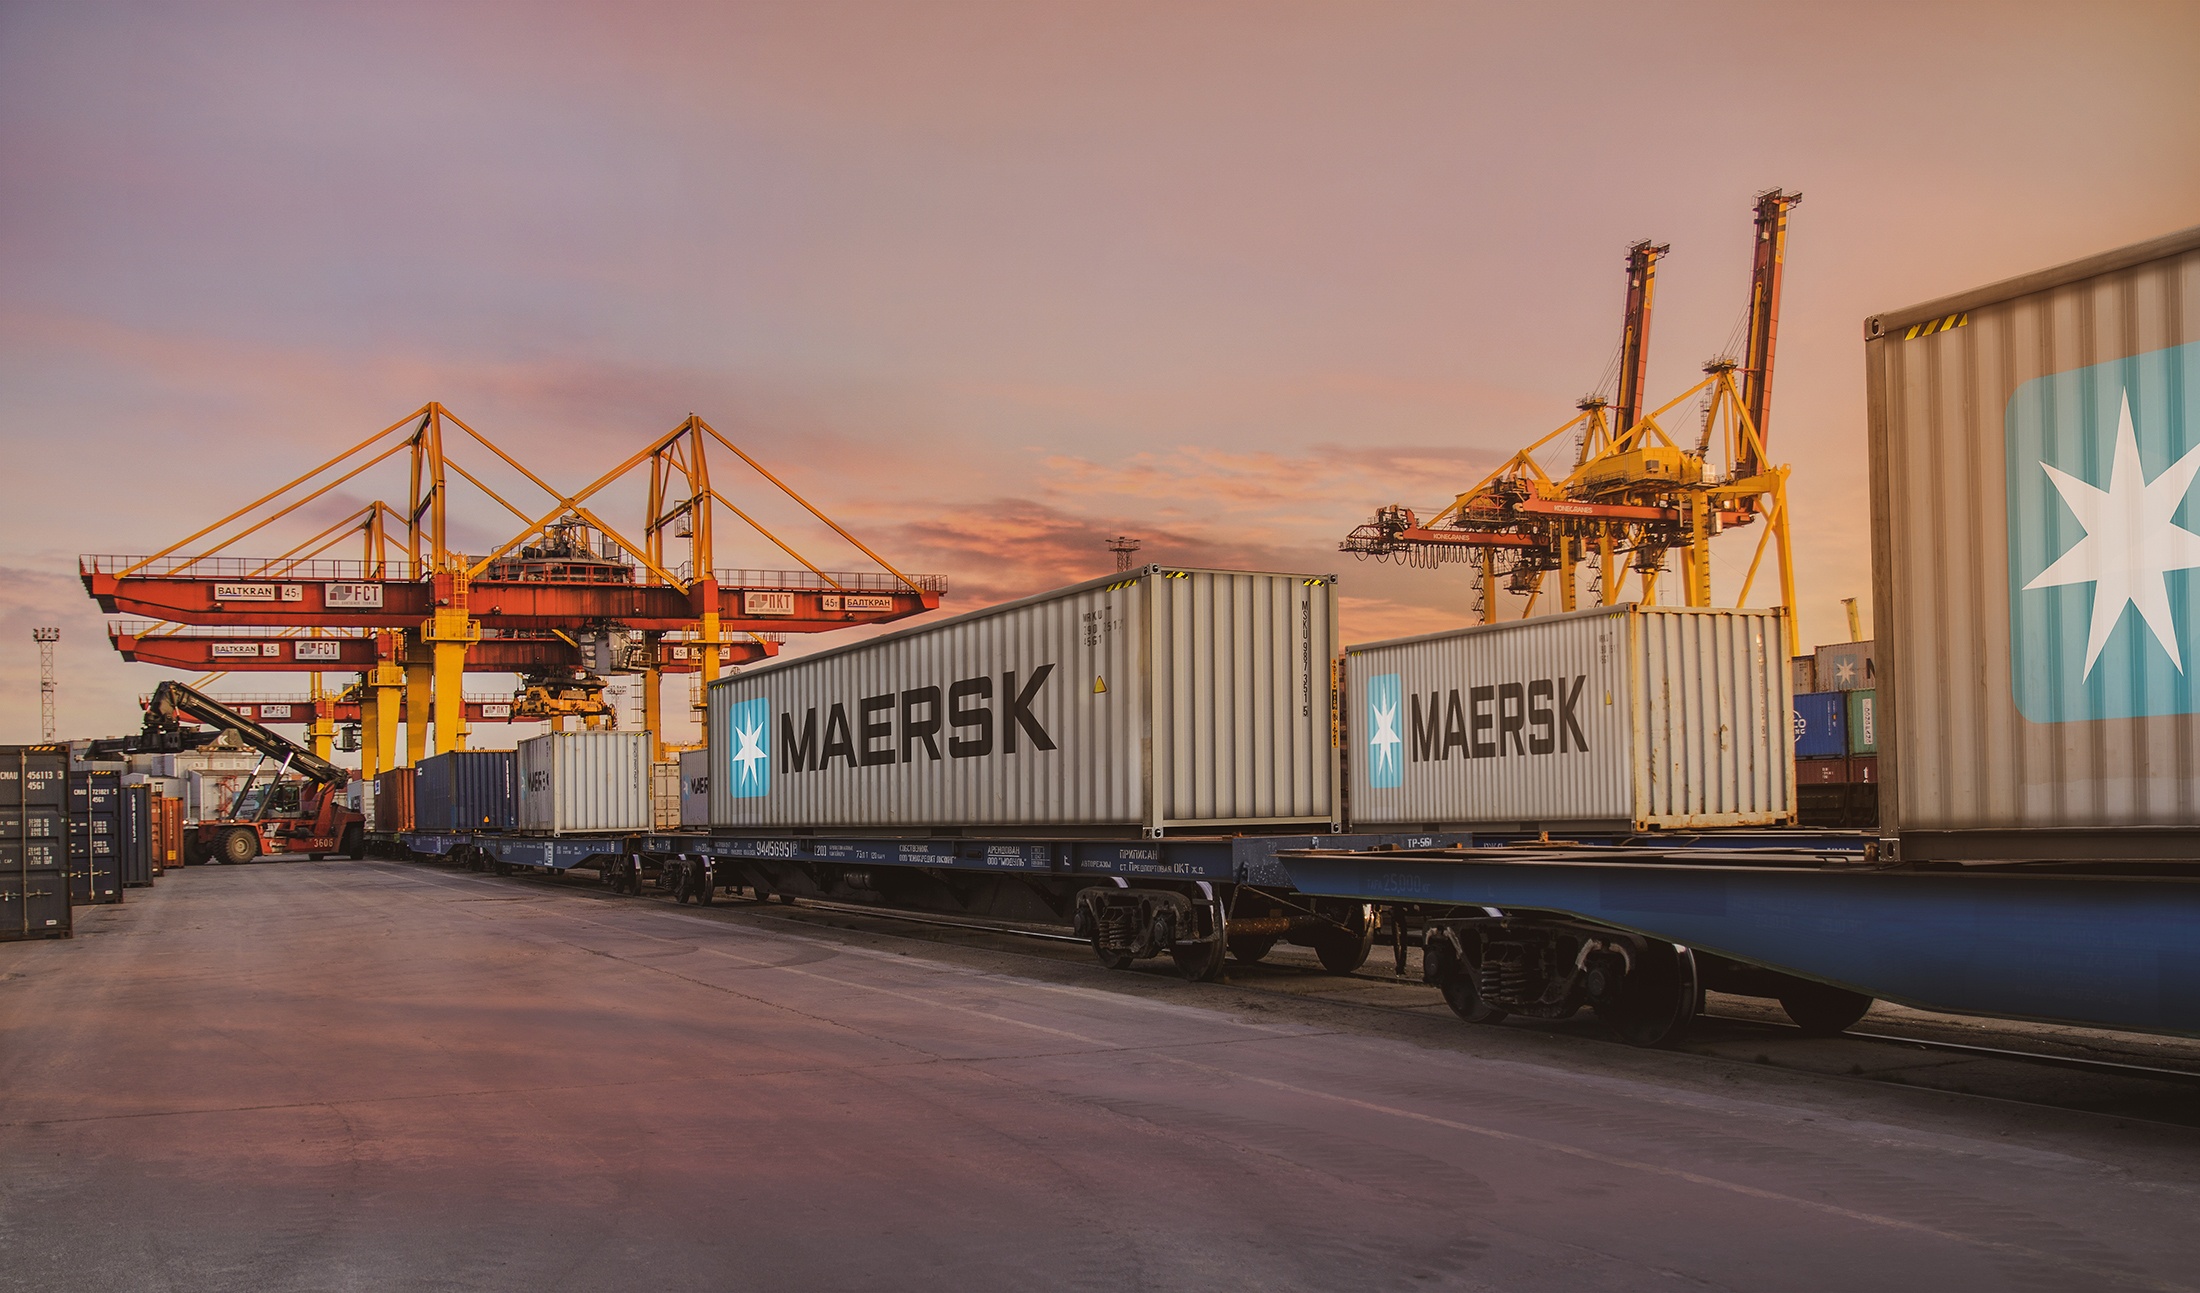 Maersk doubles capacity on weekly ocean-rail service in Asia/Europe routes